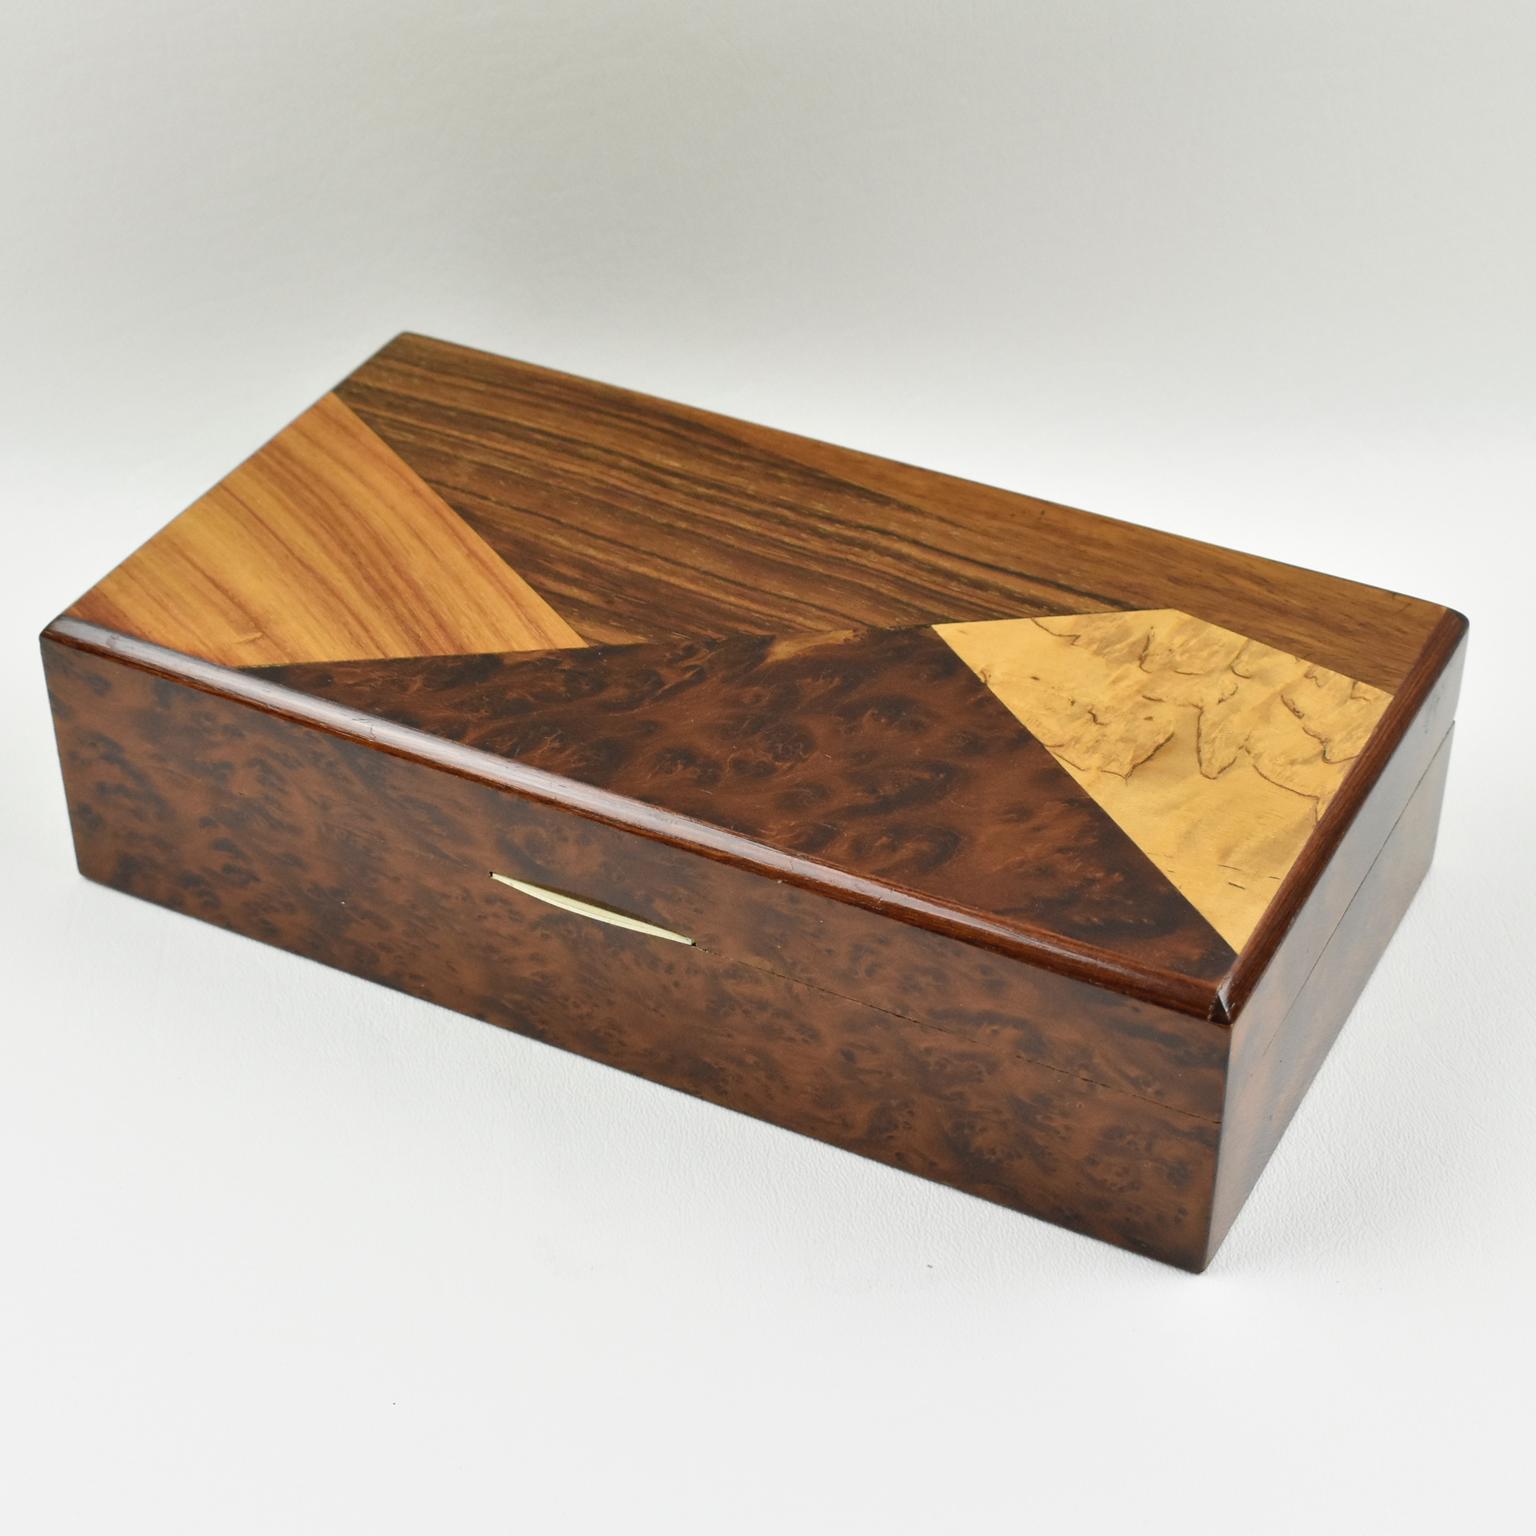 Elegant French Art Deco decorative lidded box, featuring a rectangular minimalist shape with varnished burl wood and tiny bone handle. Lid is decorated with different quality wood marquetry in geometric design. Interior in mahogany with two